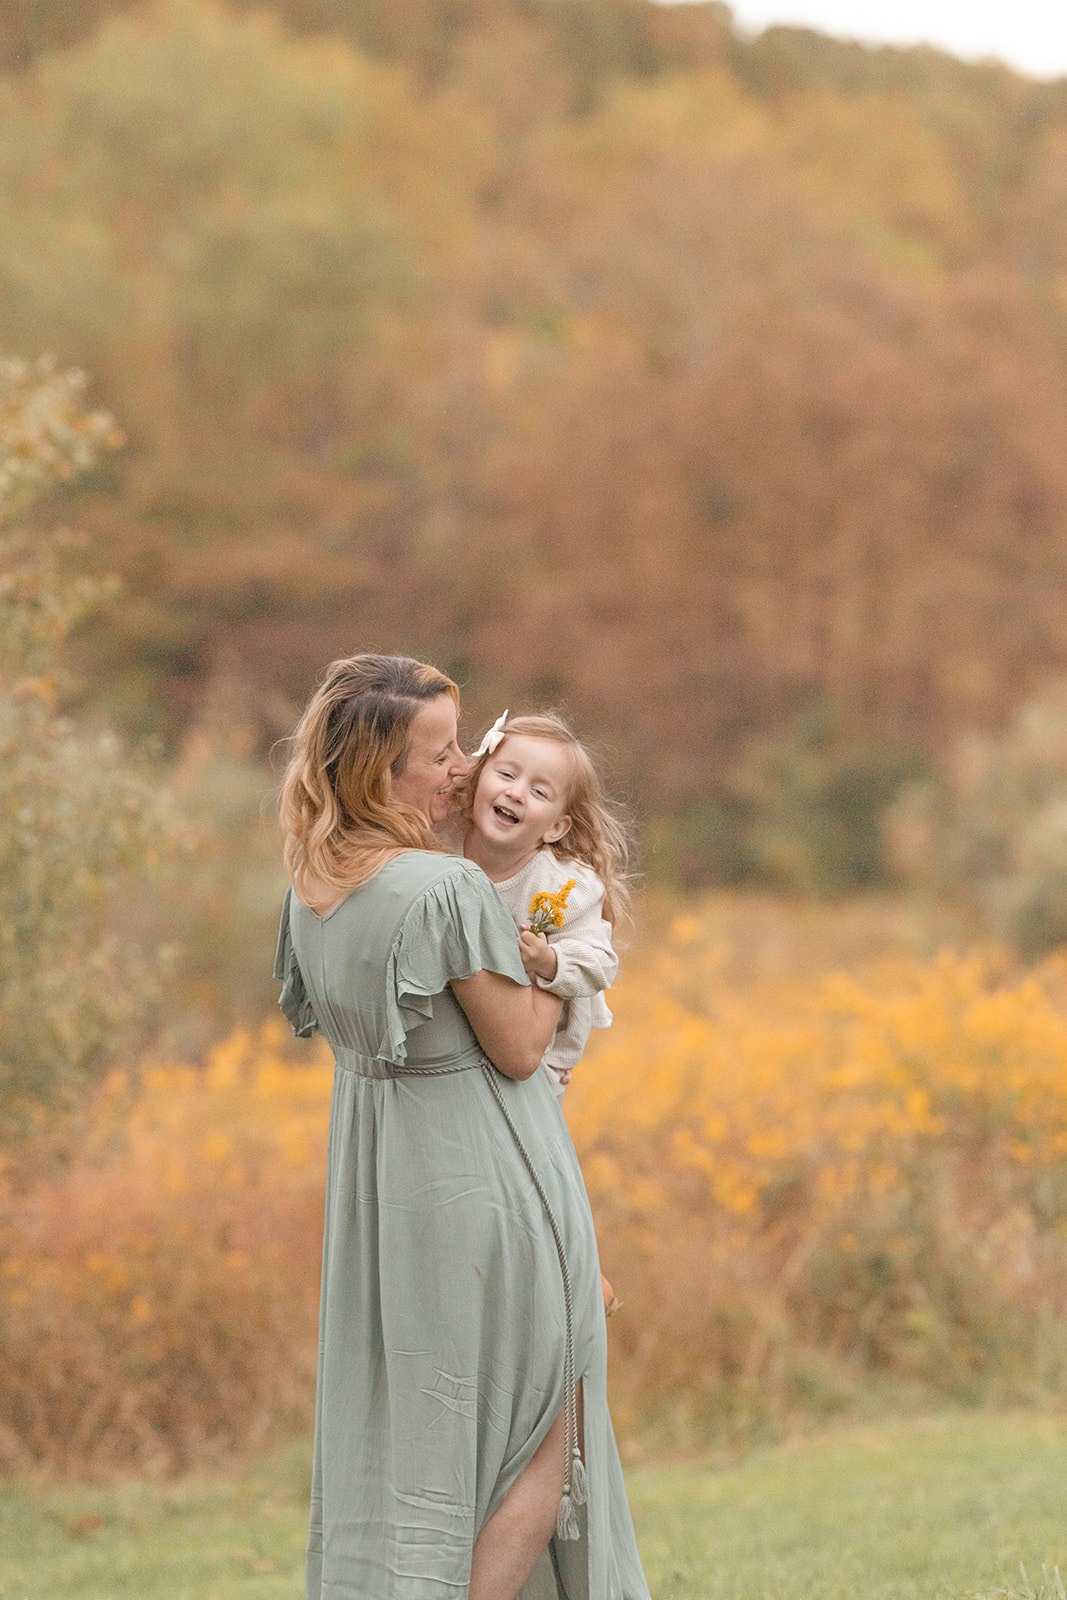 A mom in a green dress tickles and plays with her young daughter in a field of wildflowers after visiting a Montessori preschool Pittsburgh